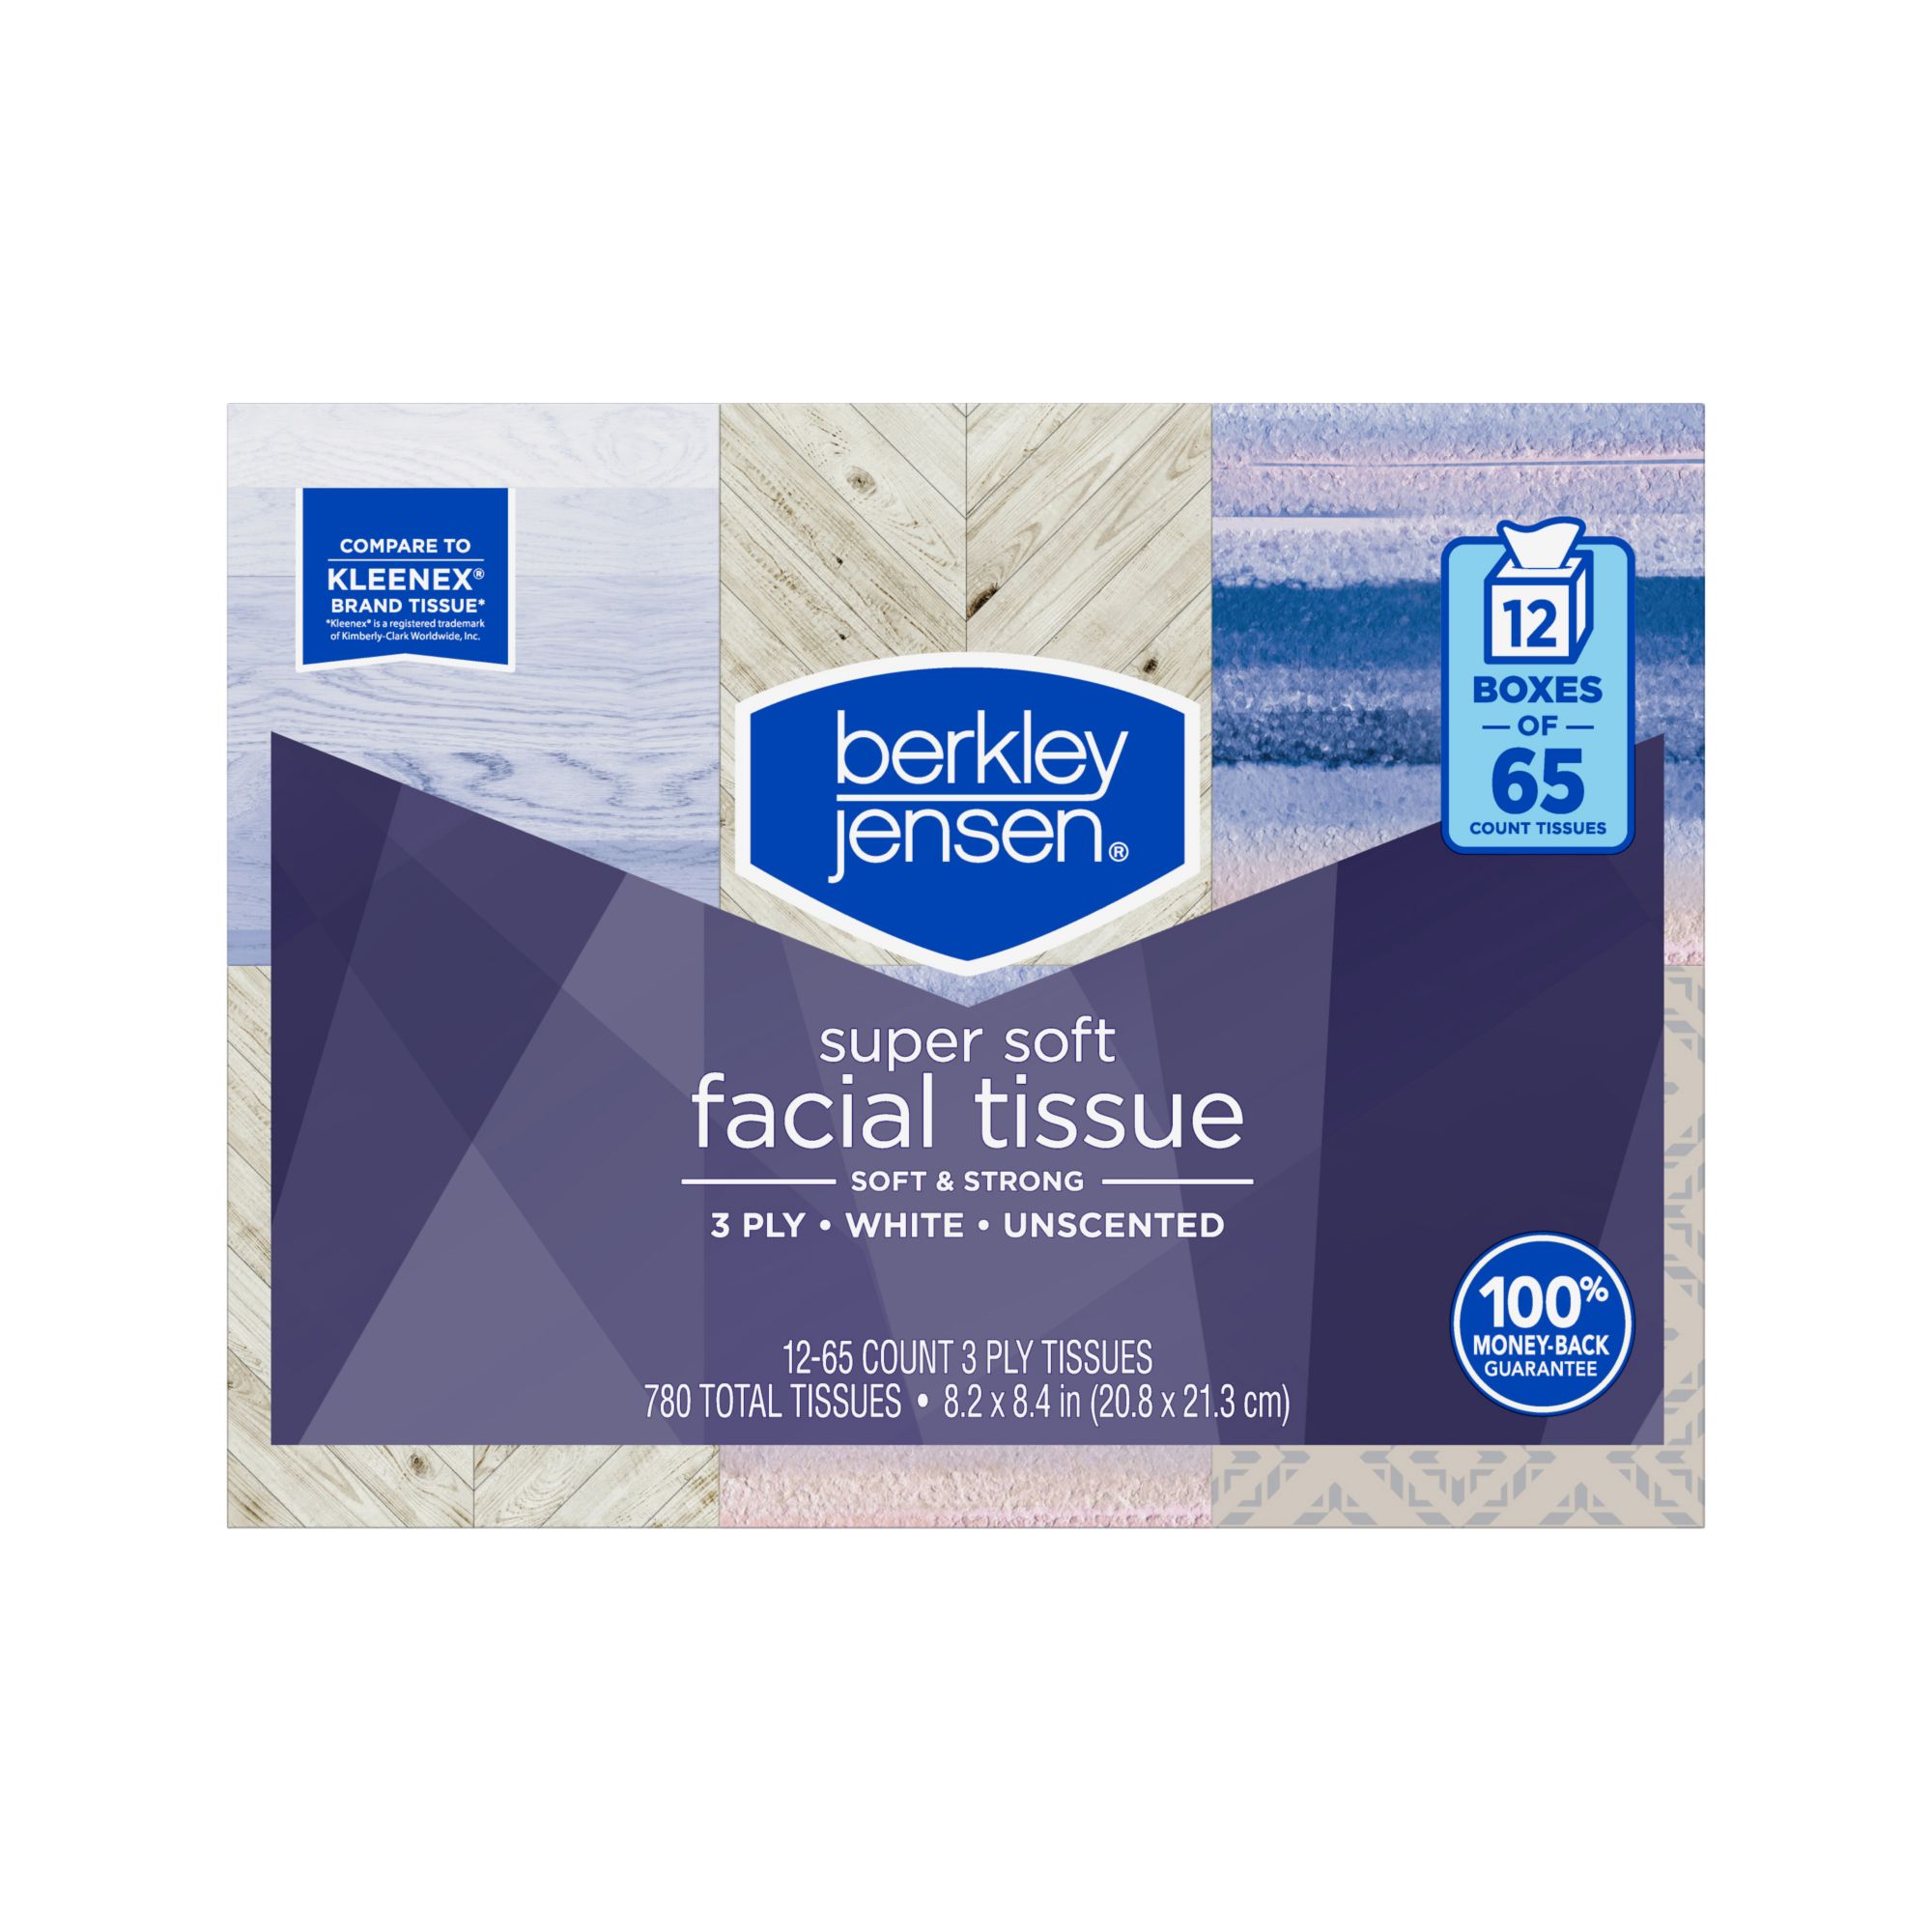 Kleenex Trusted Care Facial Tissues, 12 Flat Boxes